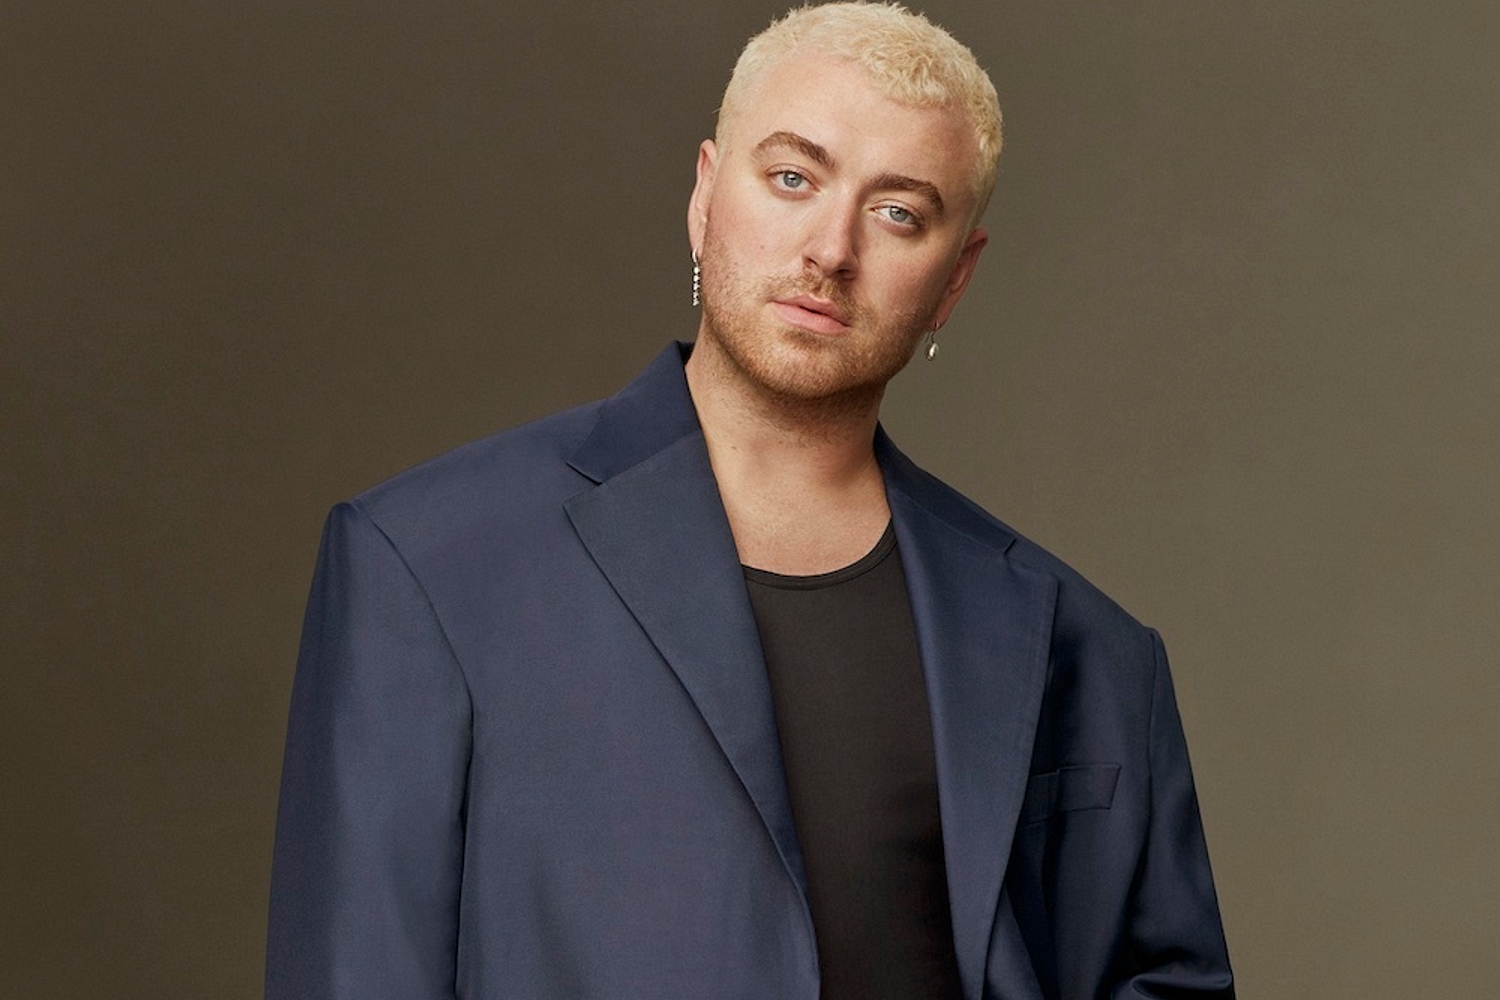 Sam Smith is taking ‘Gloria’ across the pond later this year with a North American arena tour